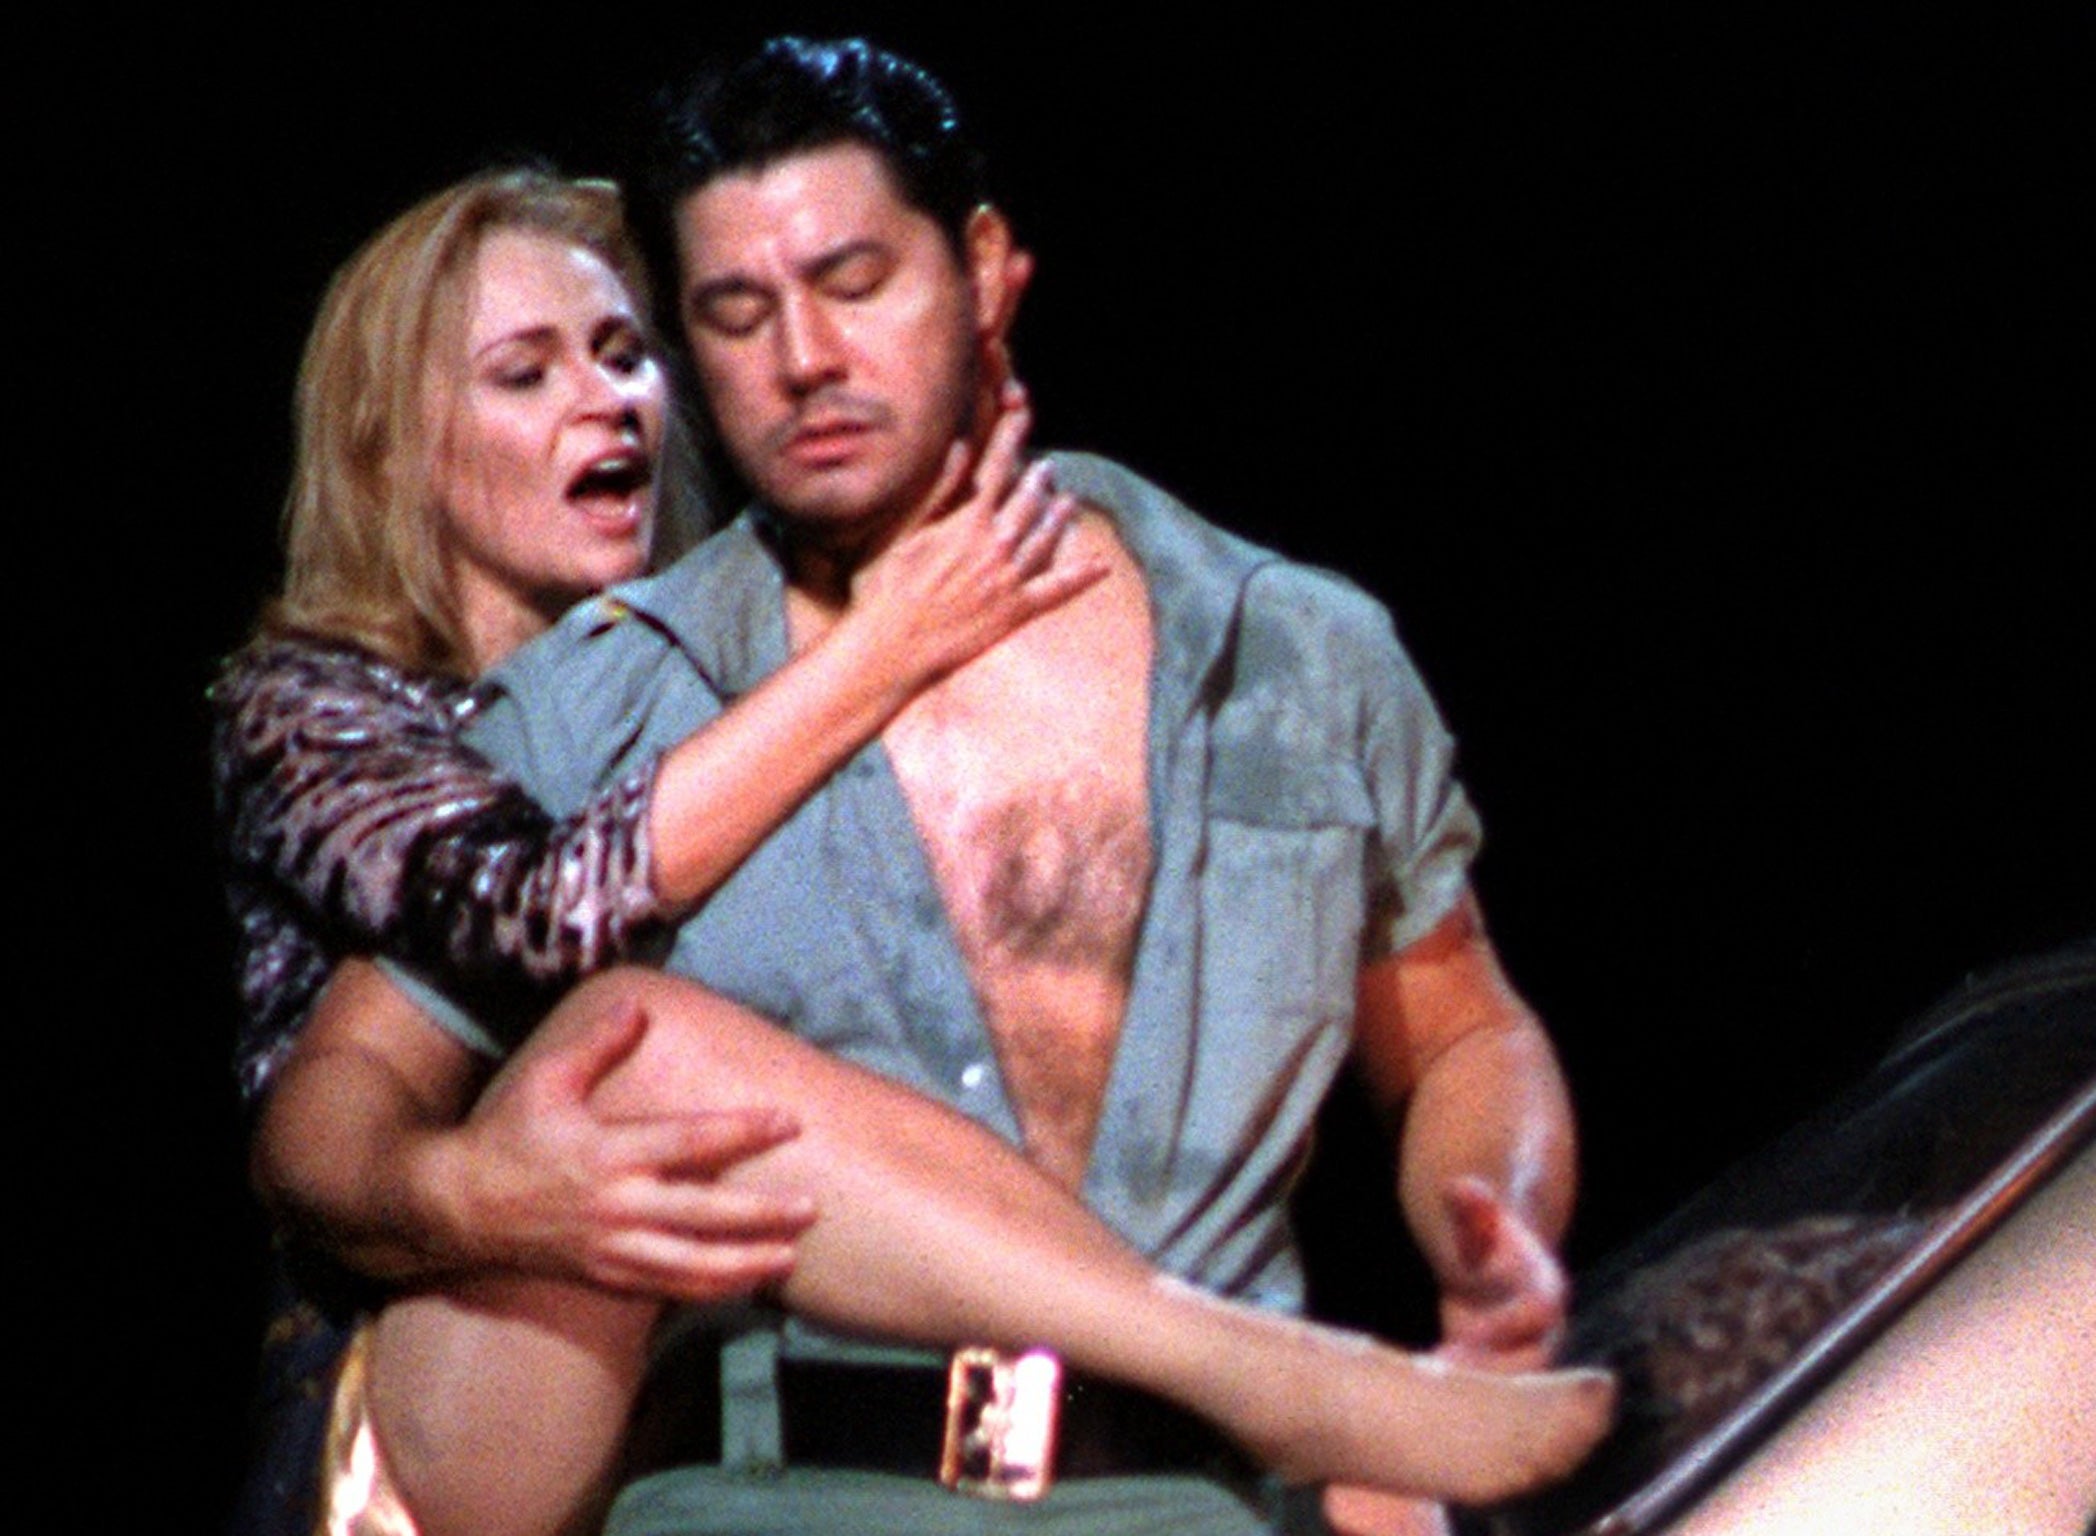 Donose and Diegel in Bieito’s Carmen